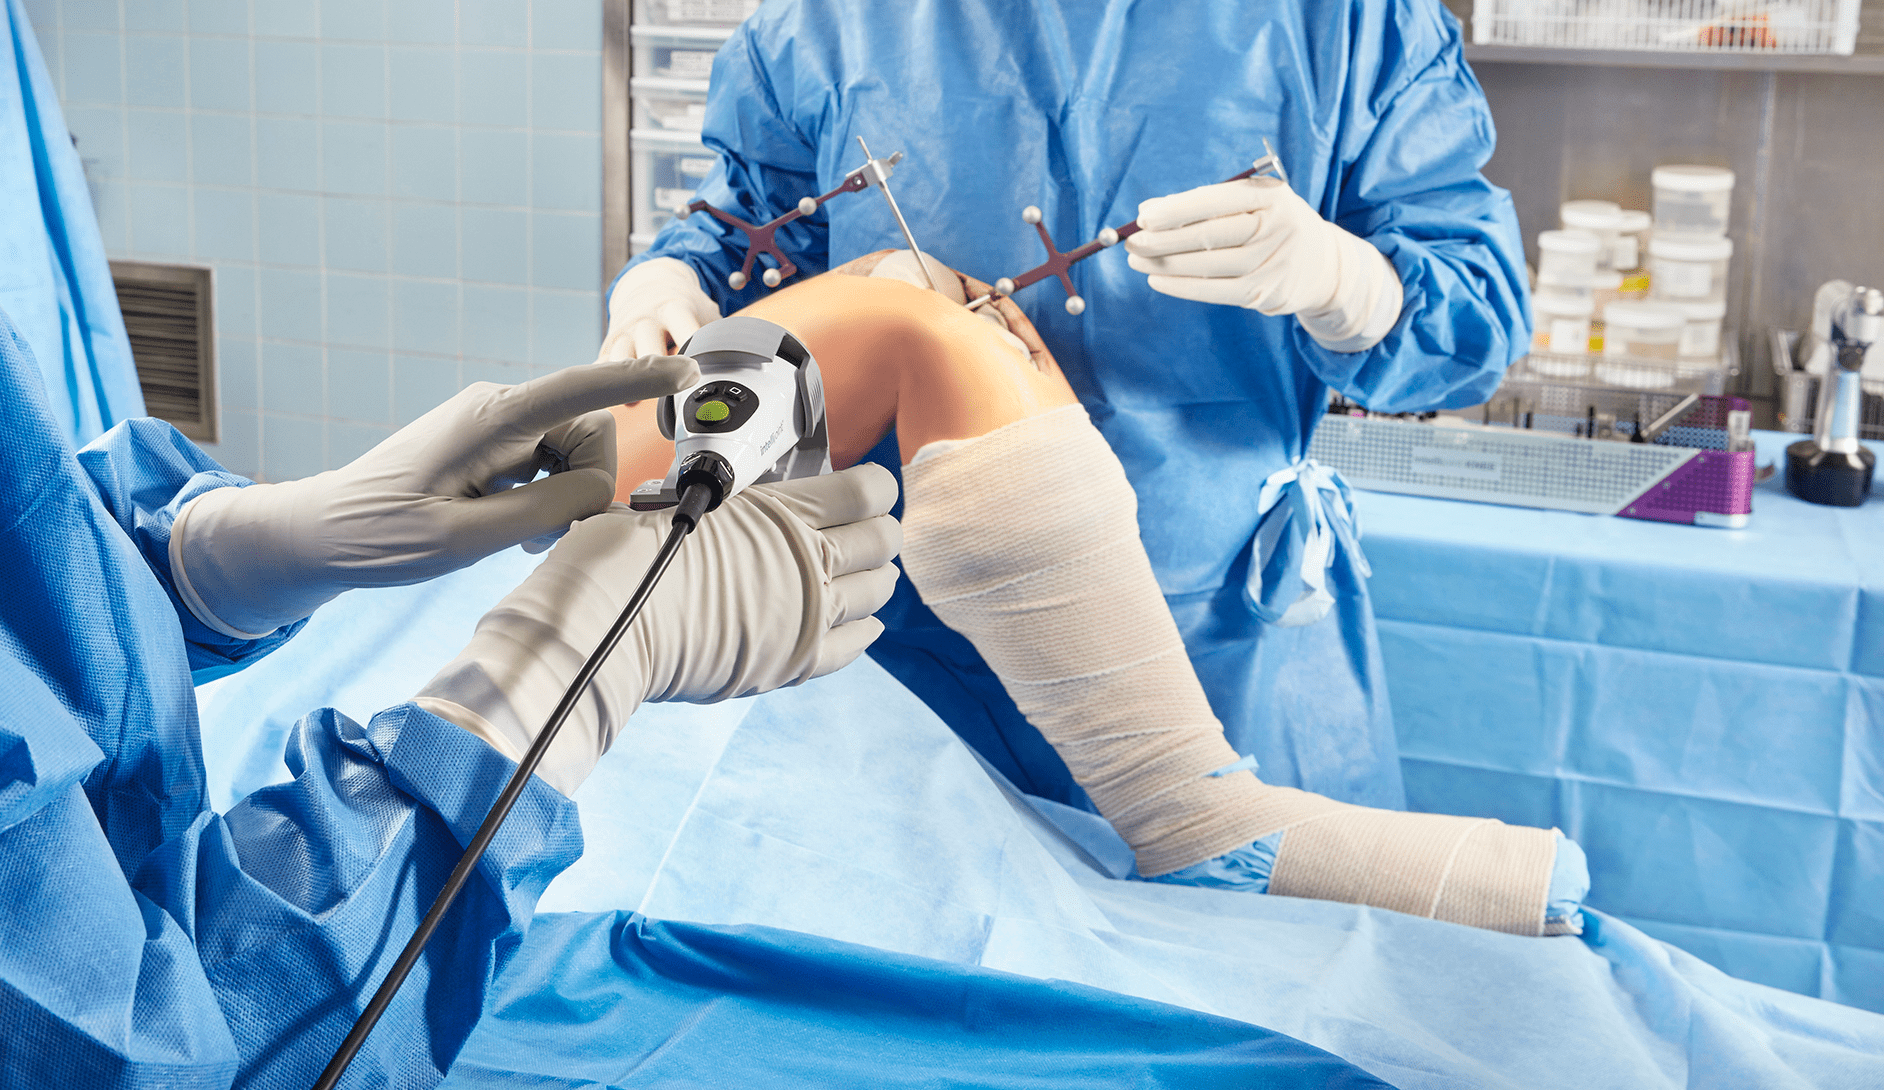 Surgeons performing knee replacement using computer-assisted surgery, Intellijoint KNEE